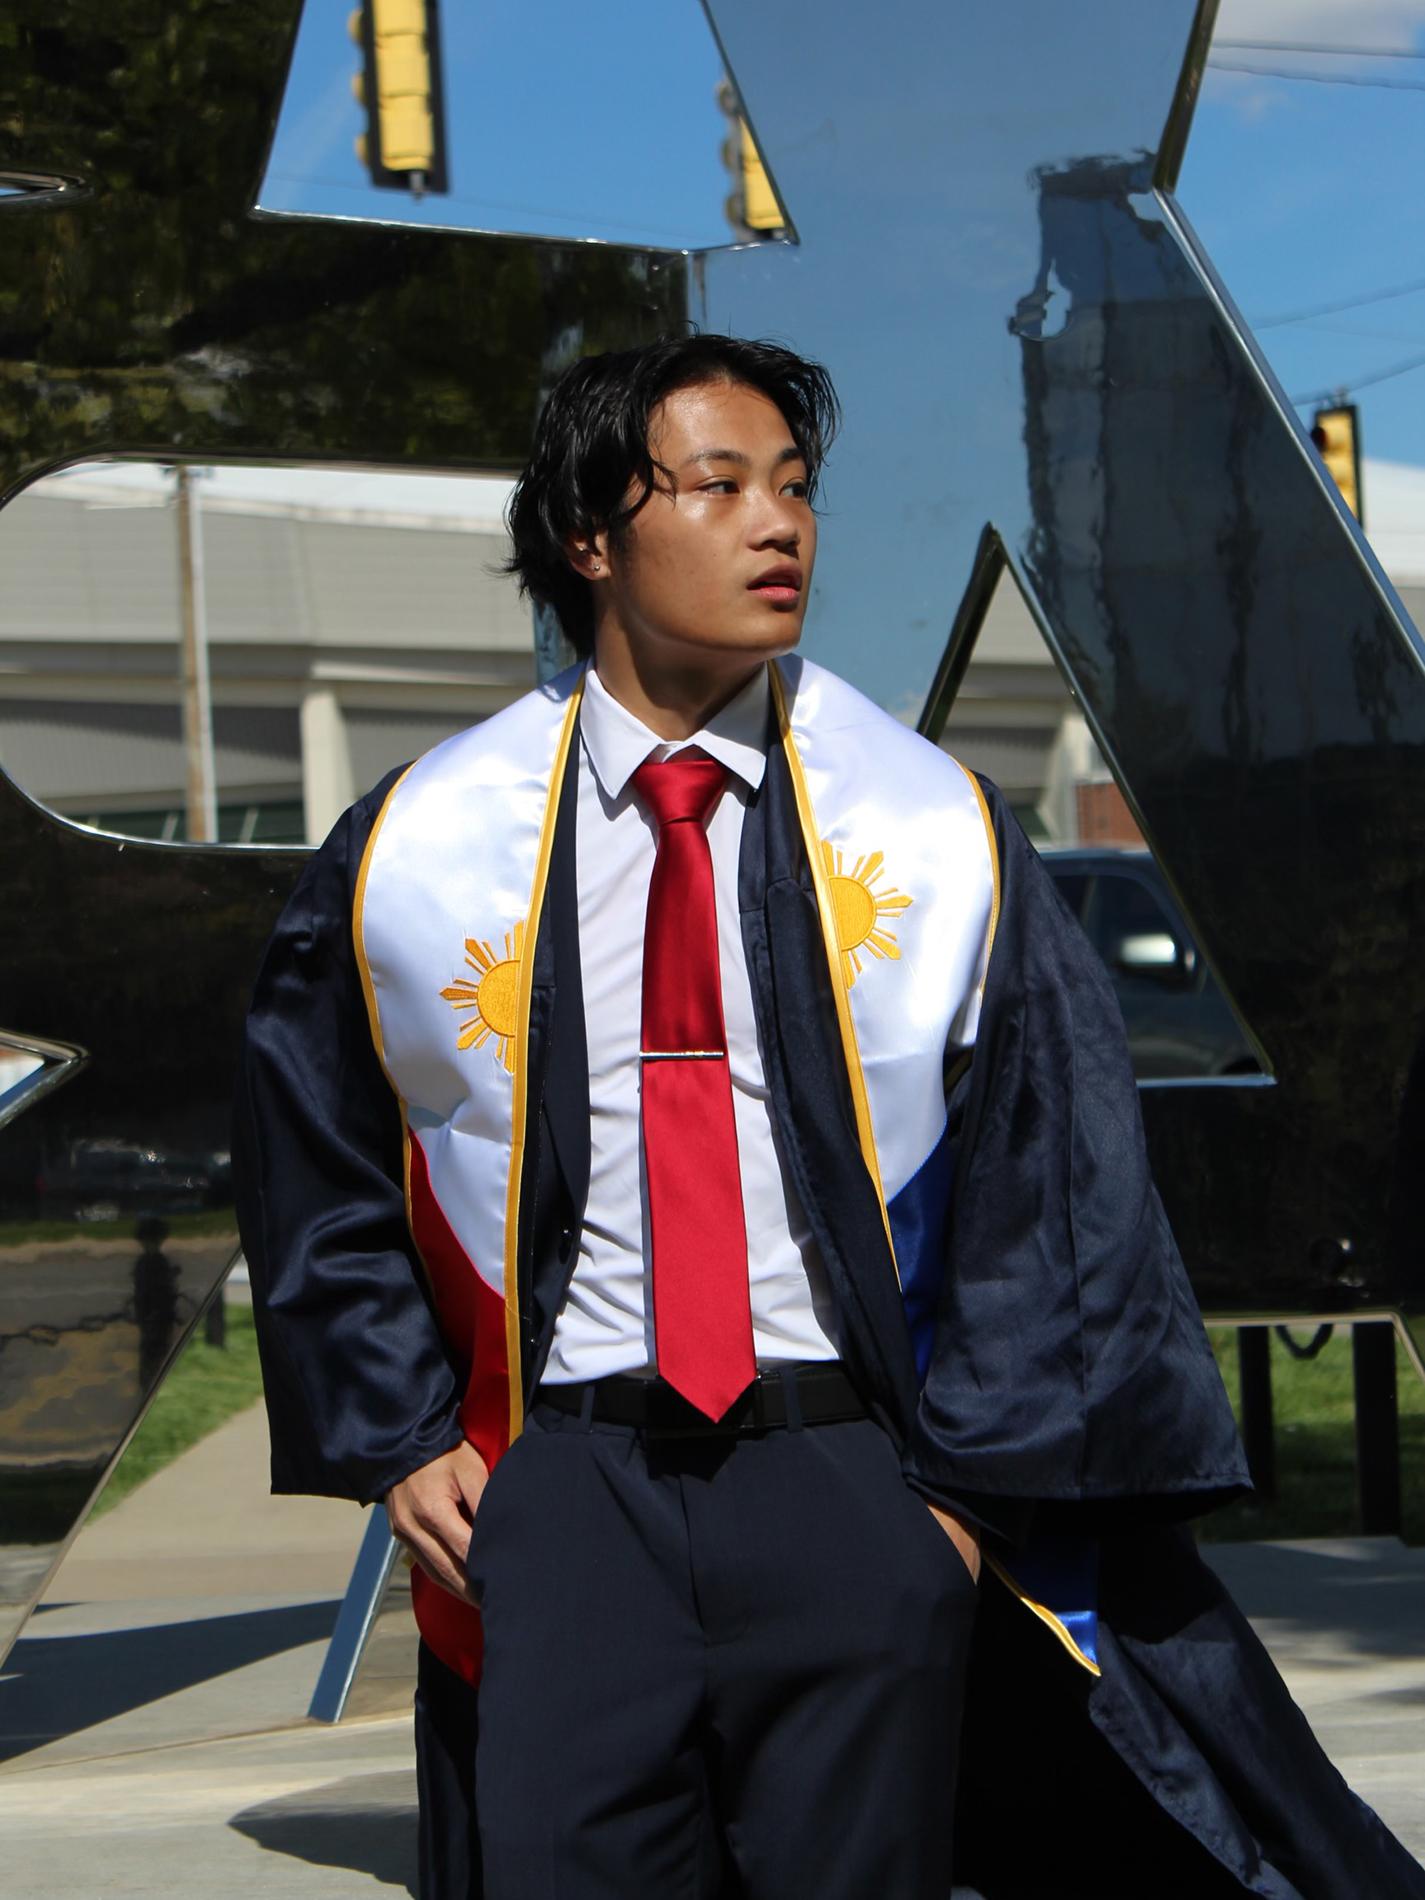 Austin Lee in suit, tie, and graduation gown